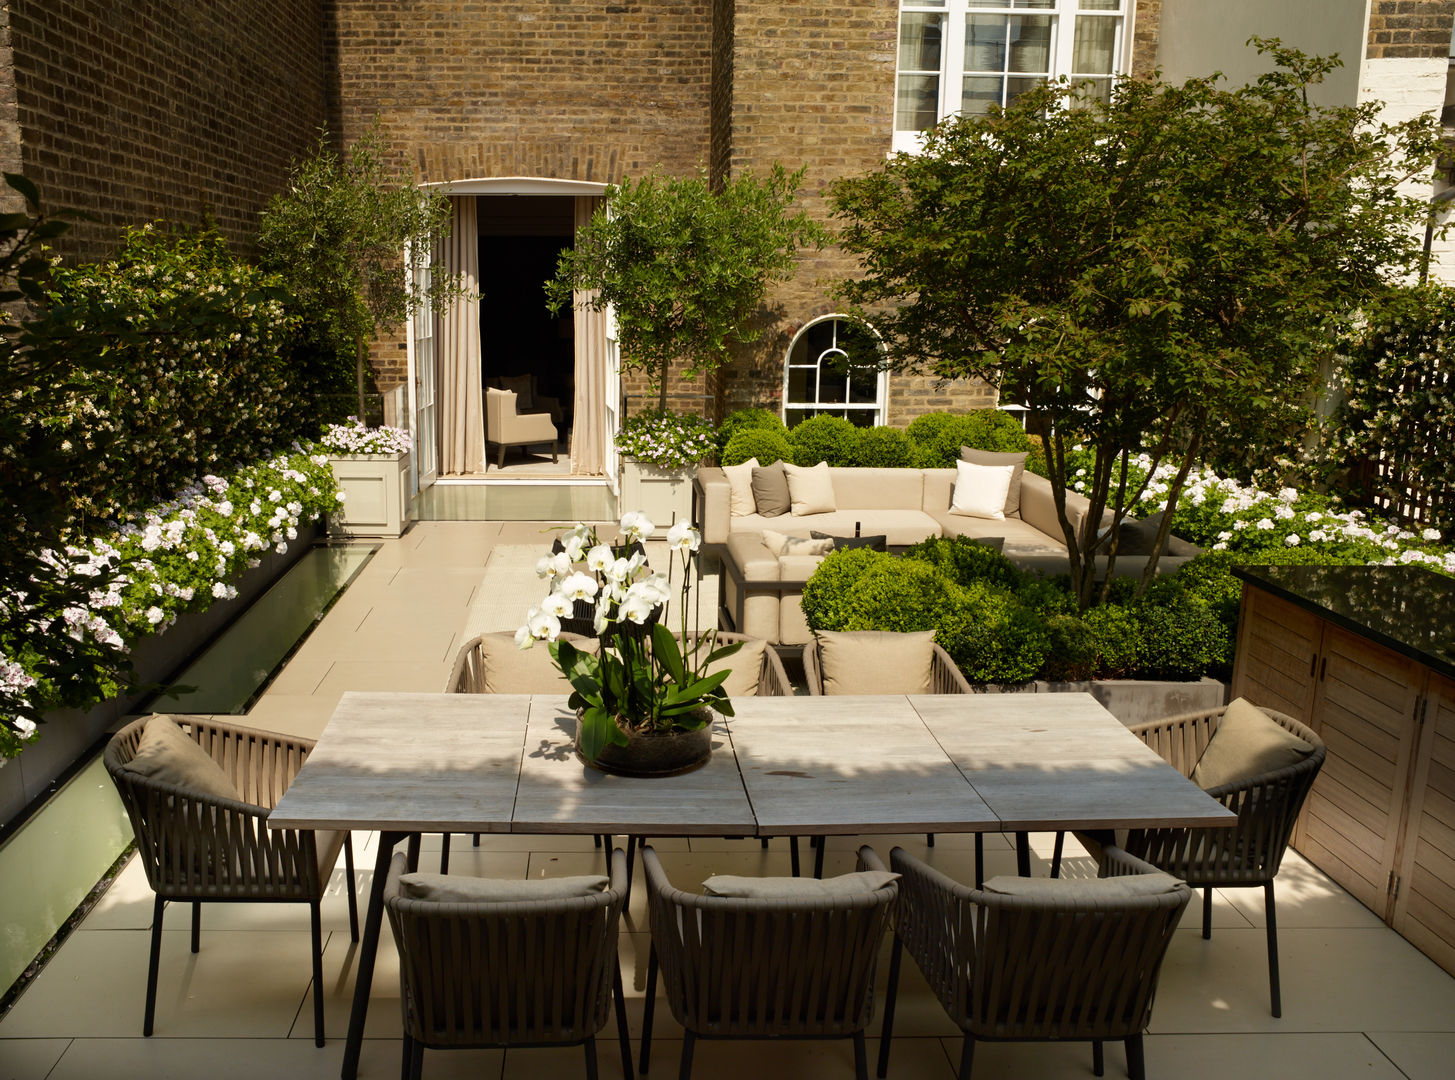 A London Roof Garden, Bowles & Wyer Bowles & Wyer Тераса